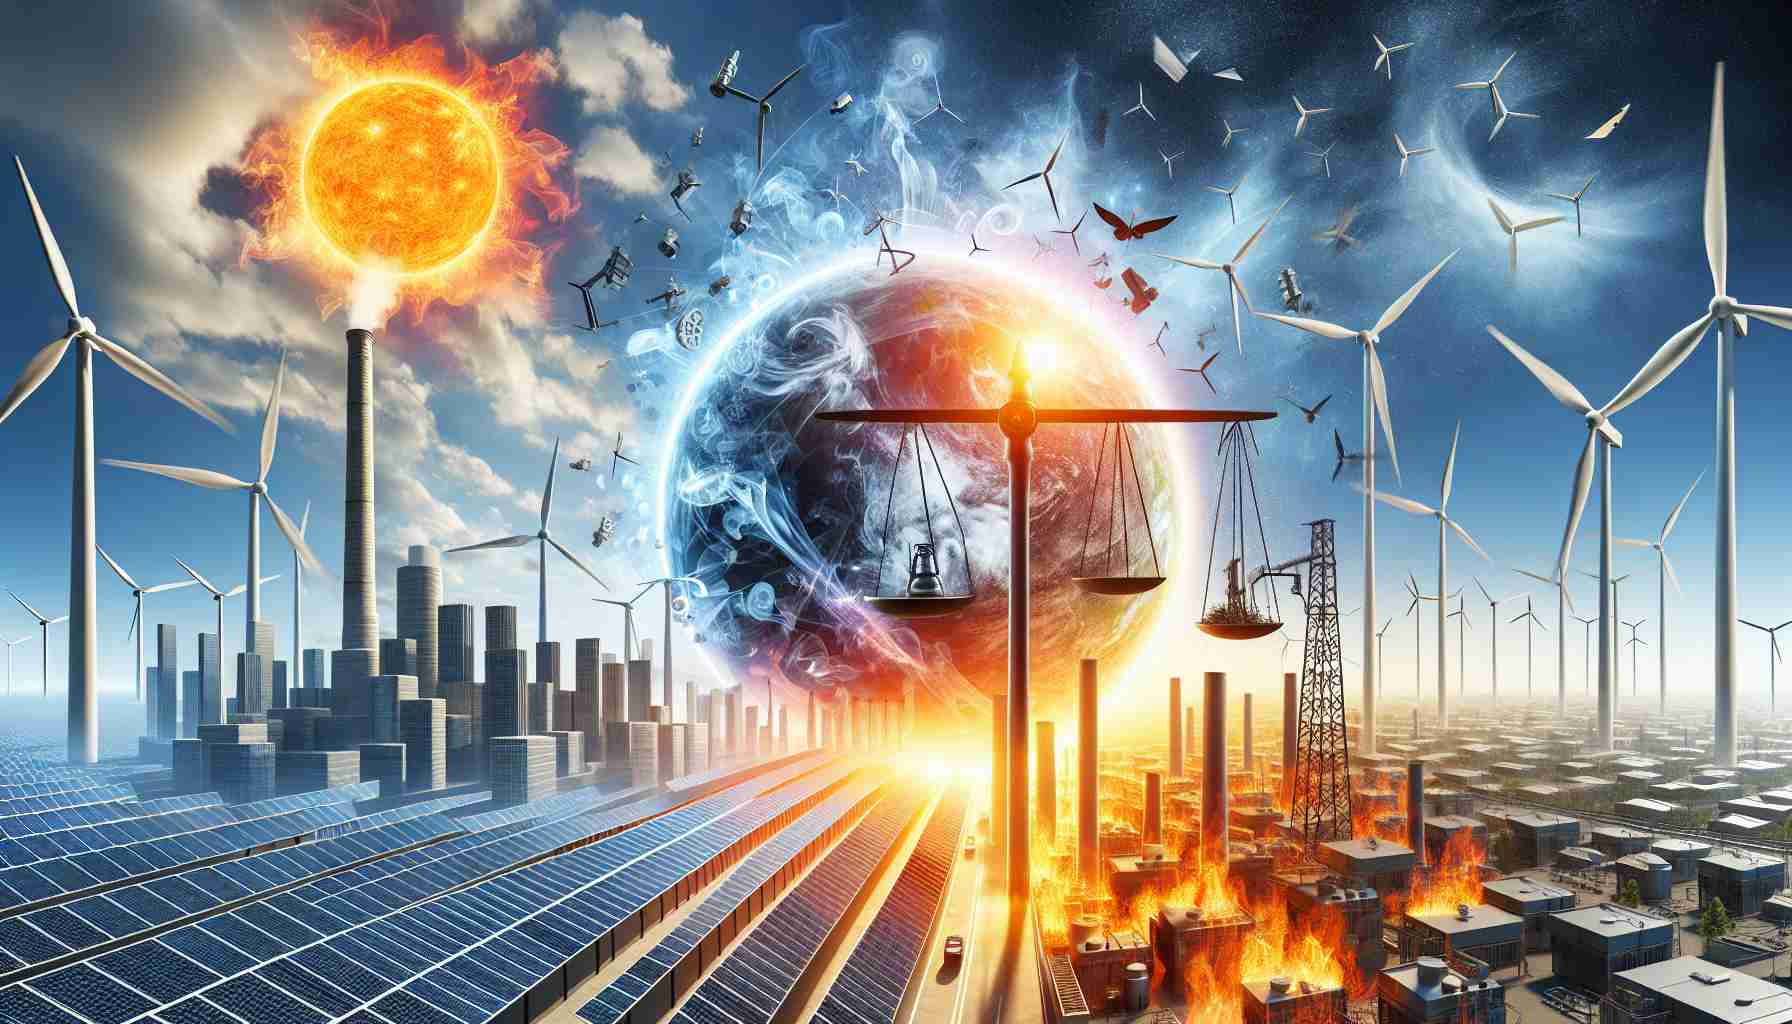 Generate a high-definition realistic image showcasing a metaphorical representation of the revolution in market dynamics brought about by the growth in renewable energy. The scene may include elements such as a large sun powering an array of photovoltaic solar panels, wind turbines spinning against a clear blue sky, a scale balancing traditional fossil fuels and renewable energy sources, and/or a futuristic city powered solely by renewable energy sources.